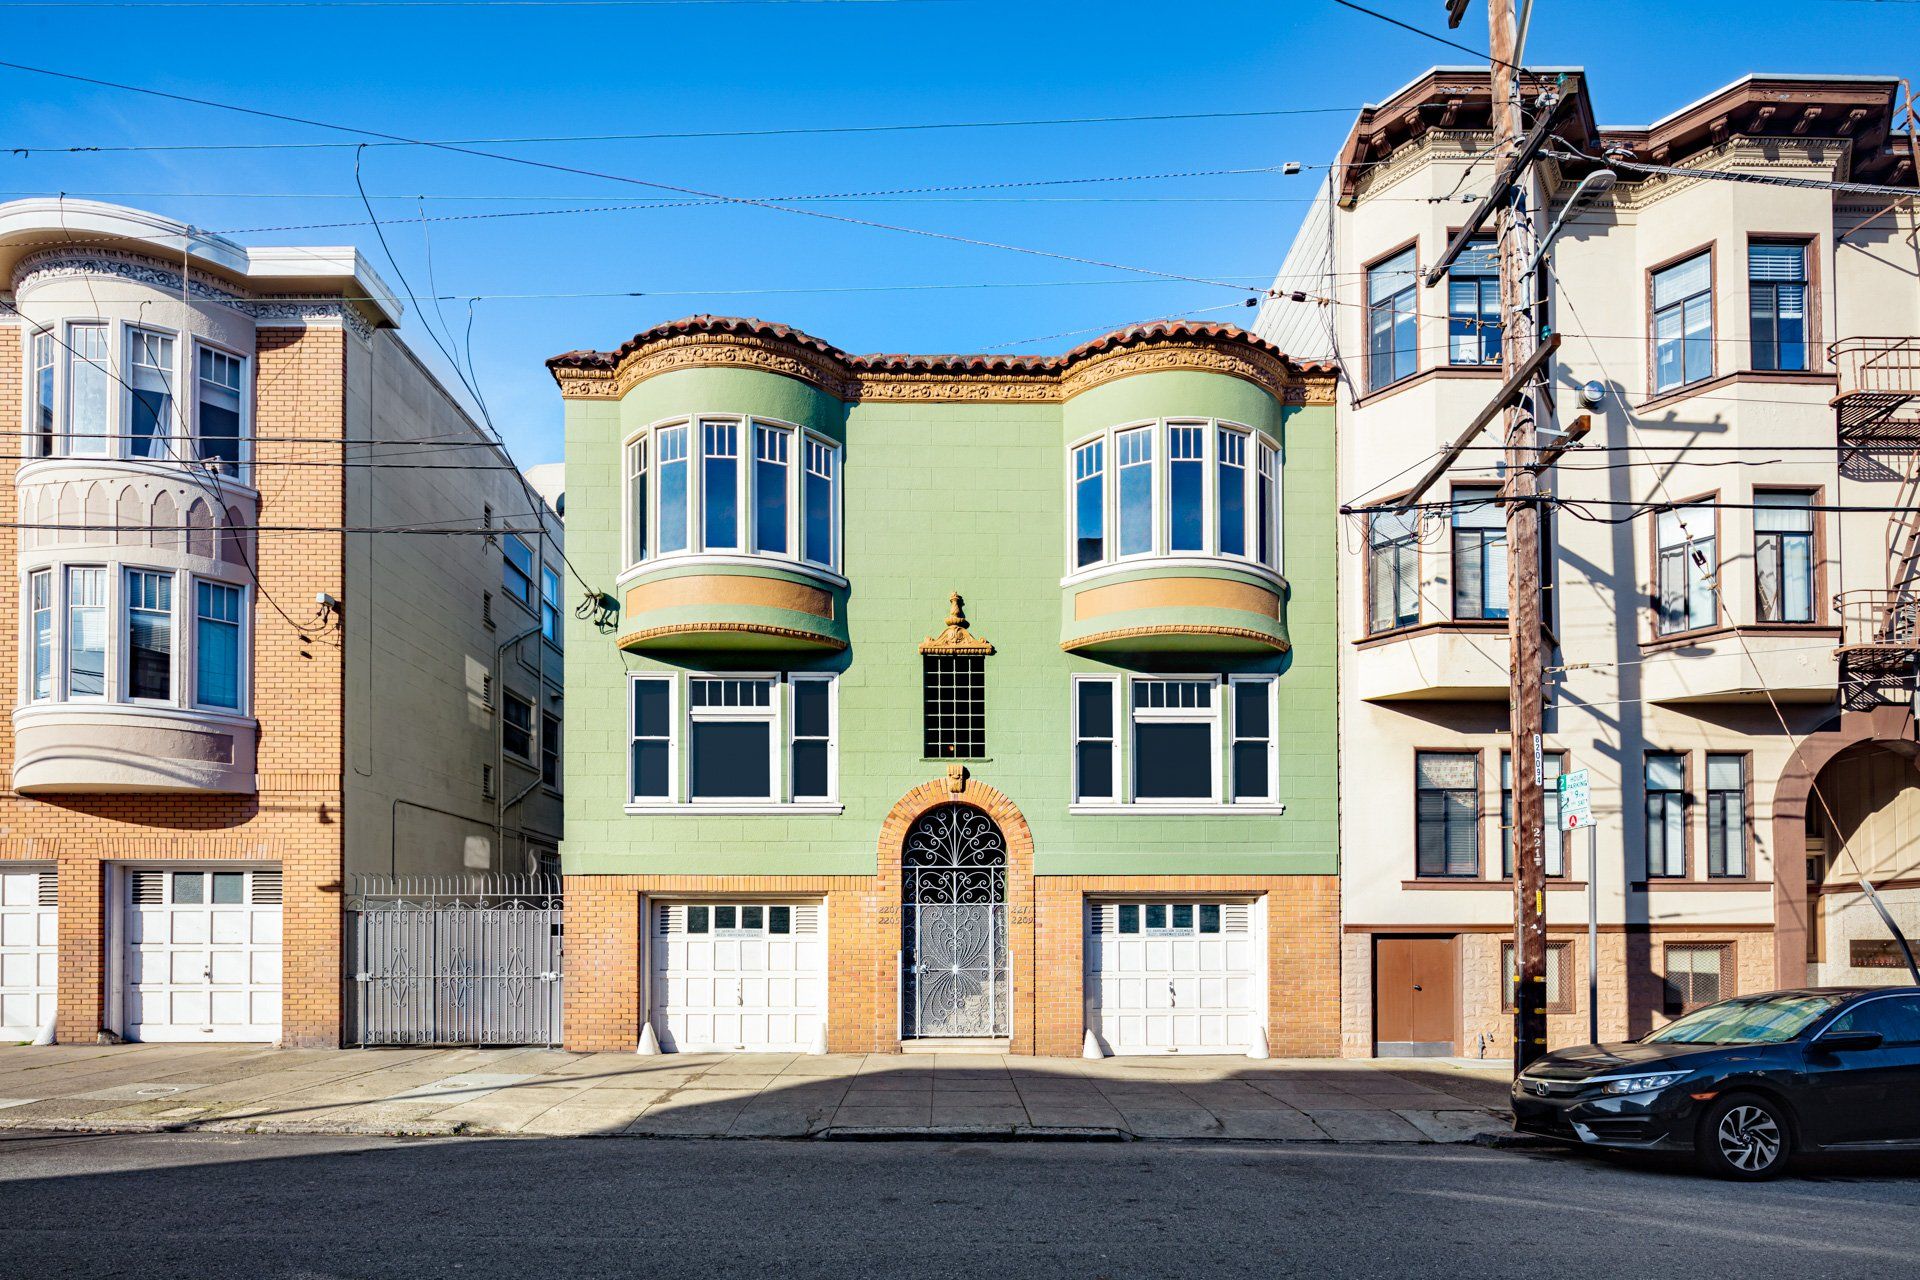 2205 Taylor St san francisco from street, a building with 2 garages & 4 windows.